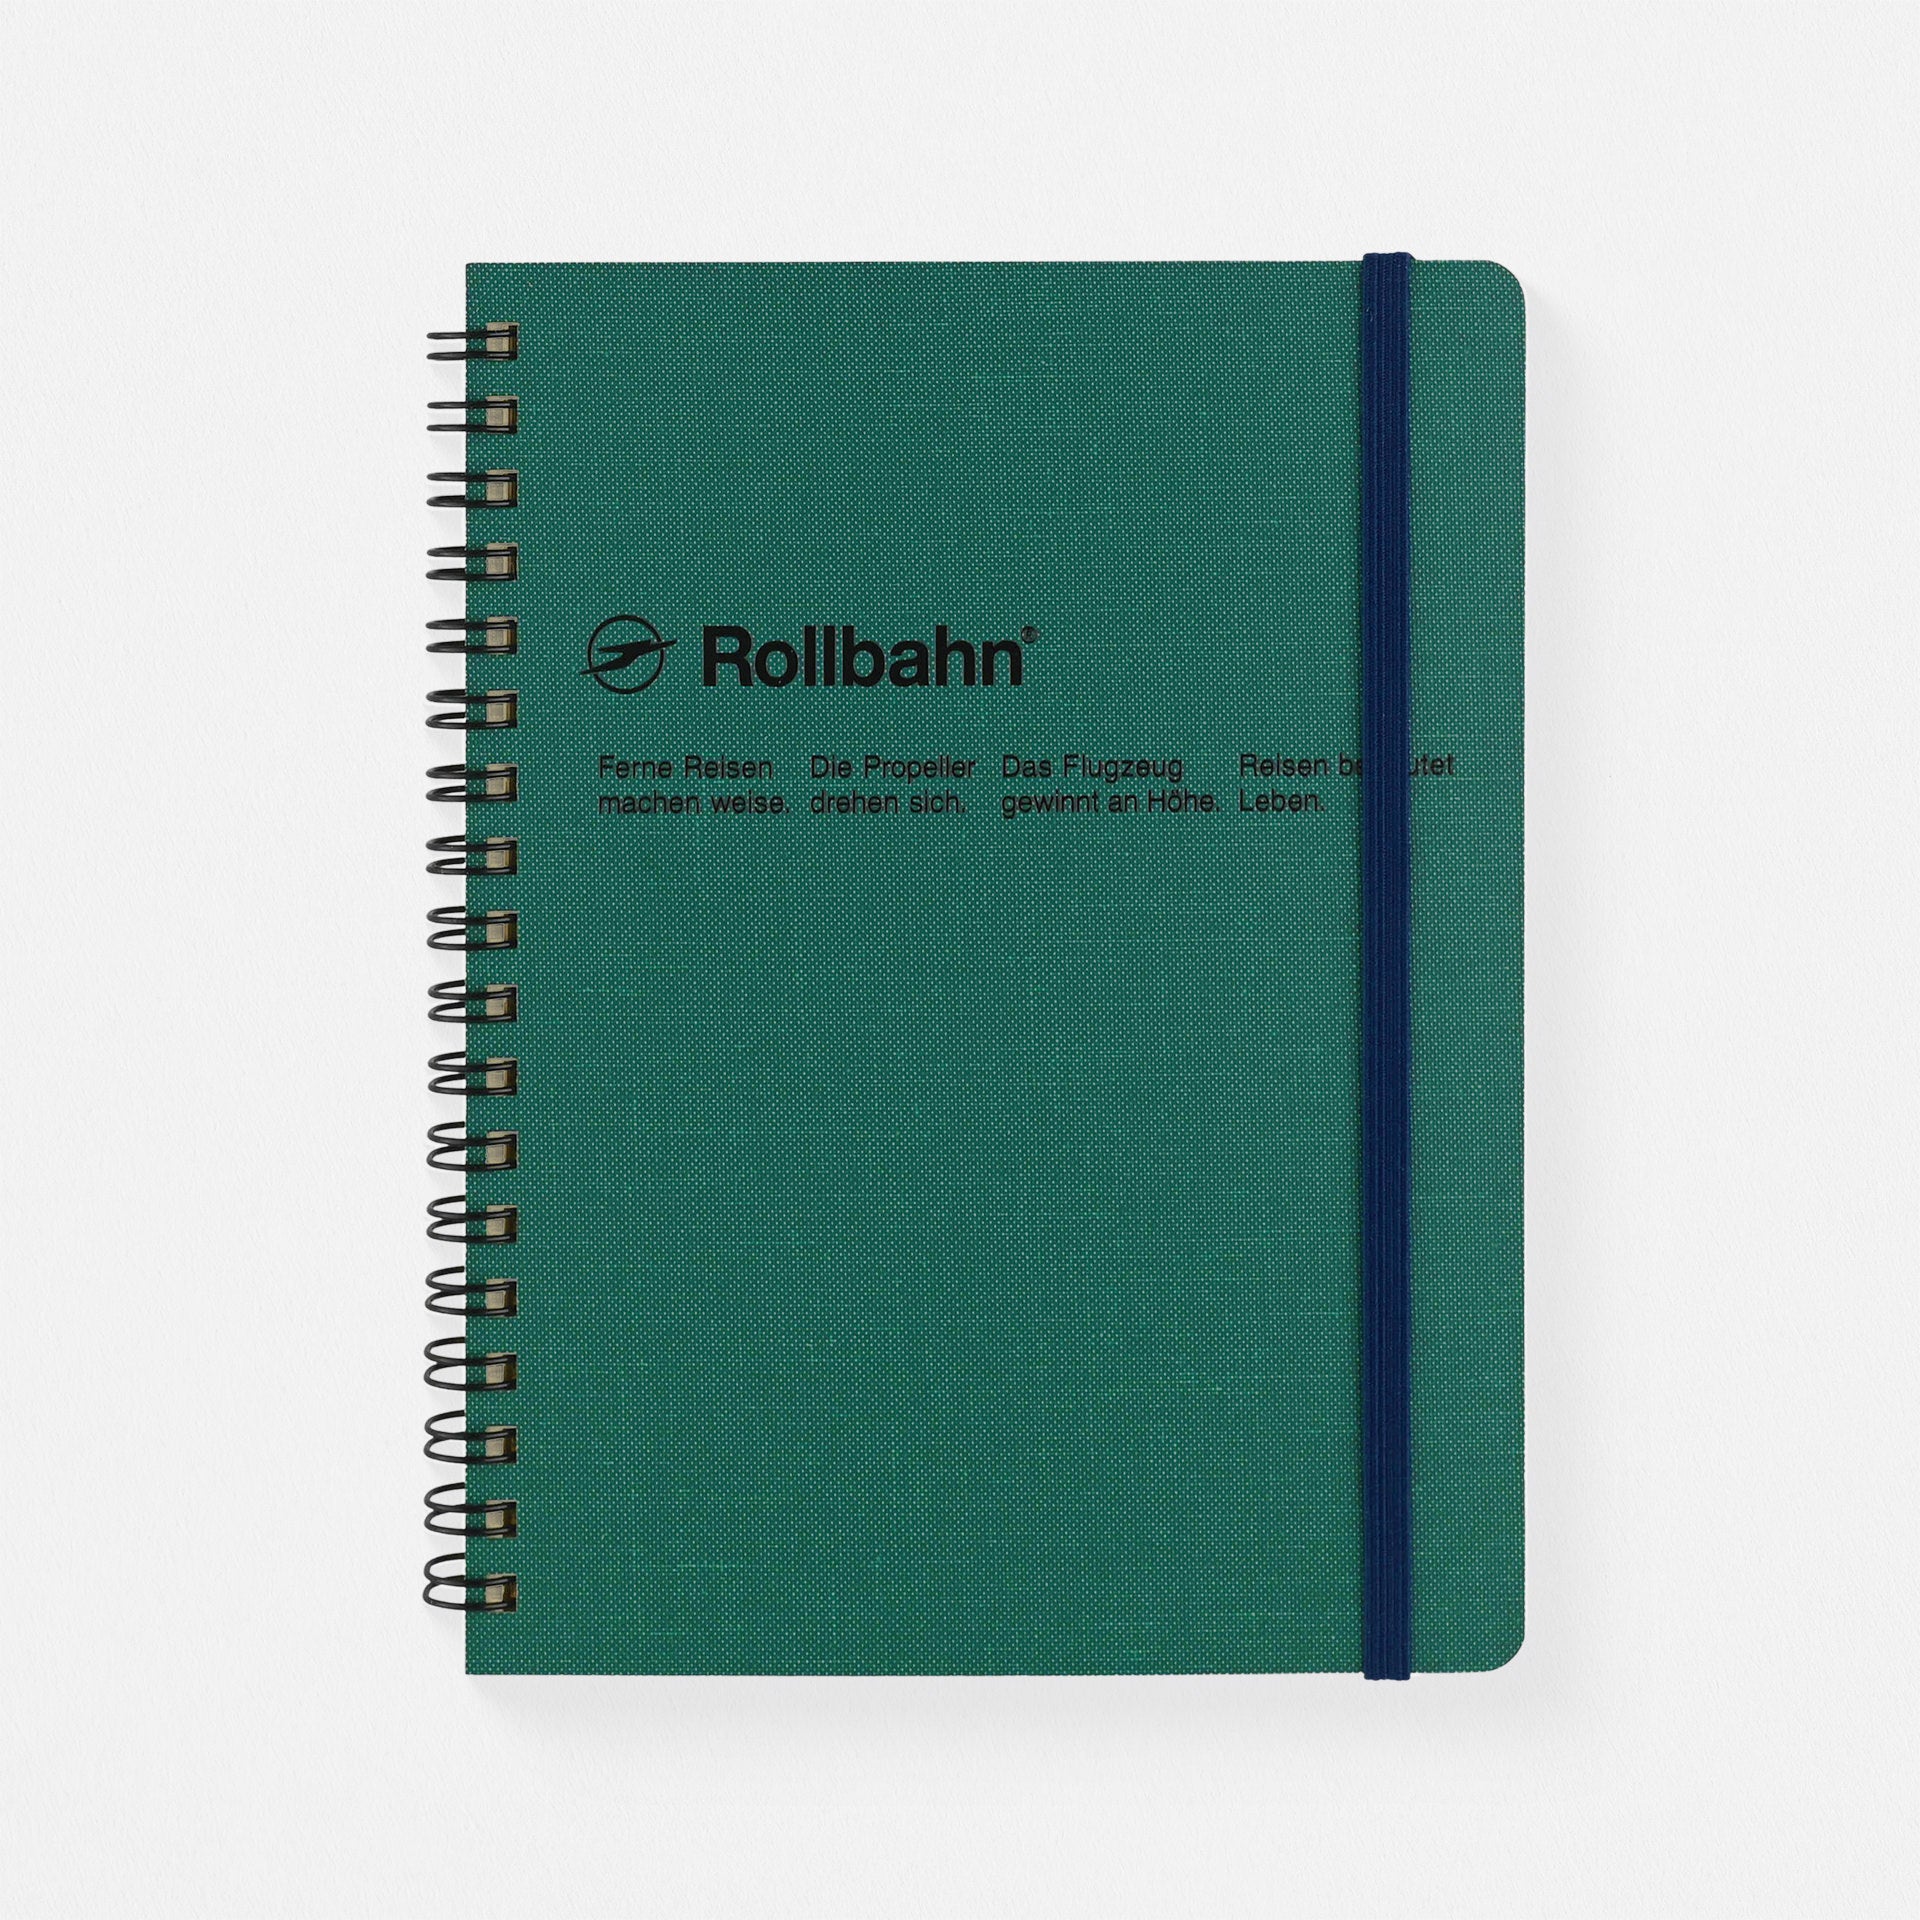 Delfonics Rollbahn Cap-Martin Textured Cover Notebook Large Or A5 | Greige, Green, Dark Blue Or Blue Green / Large (5.5 x 7")